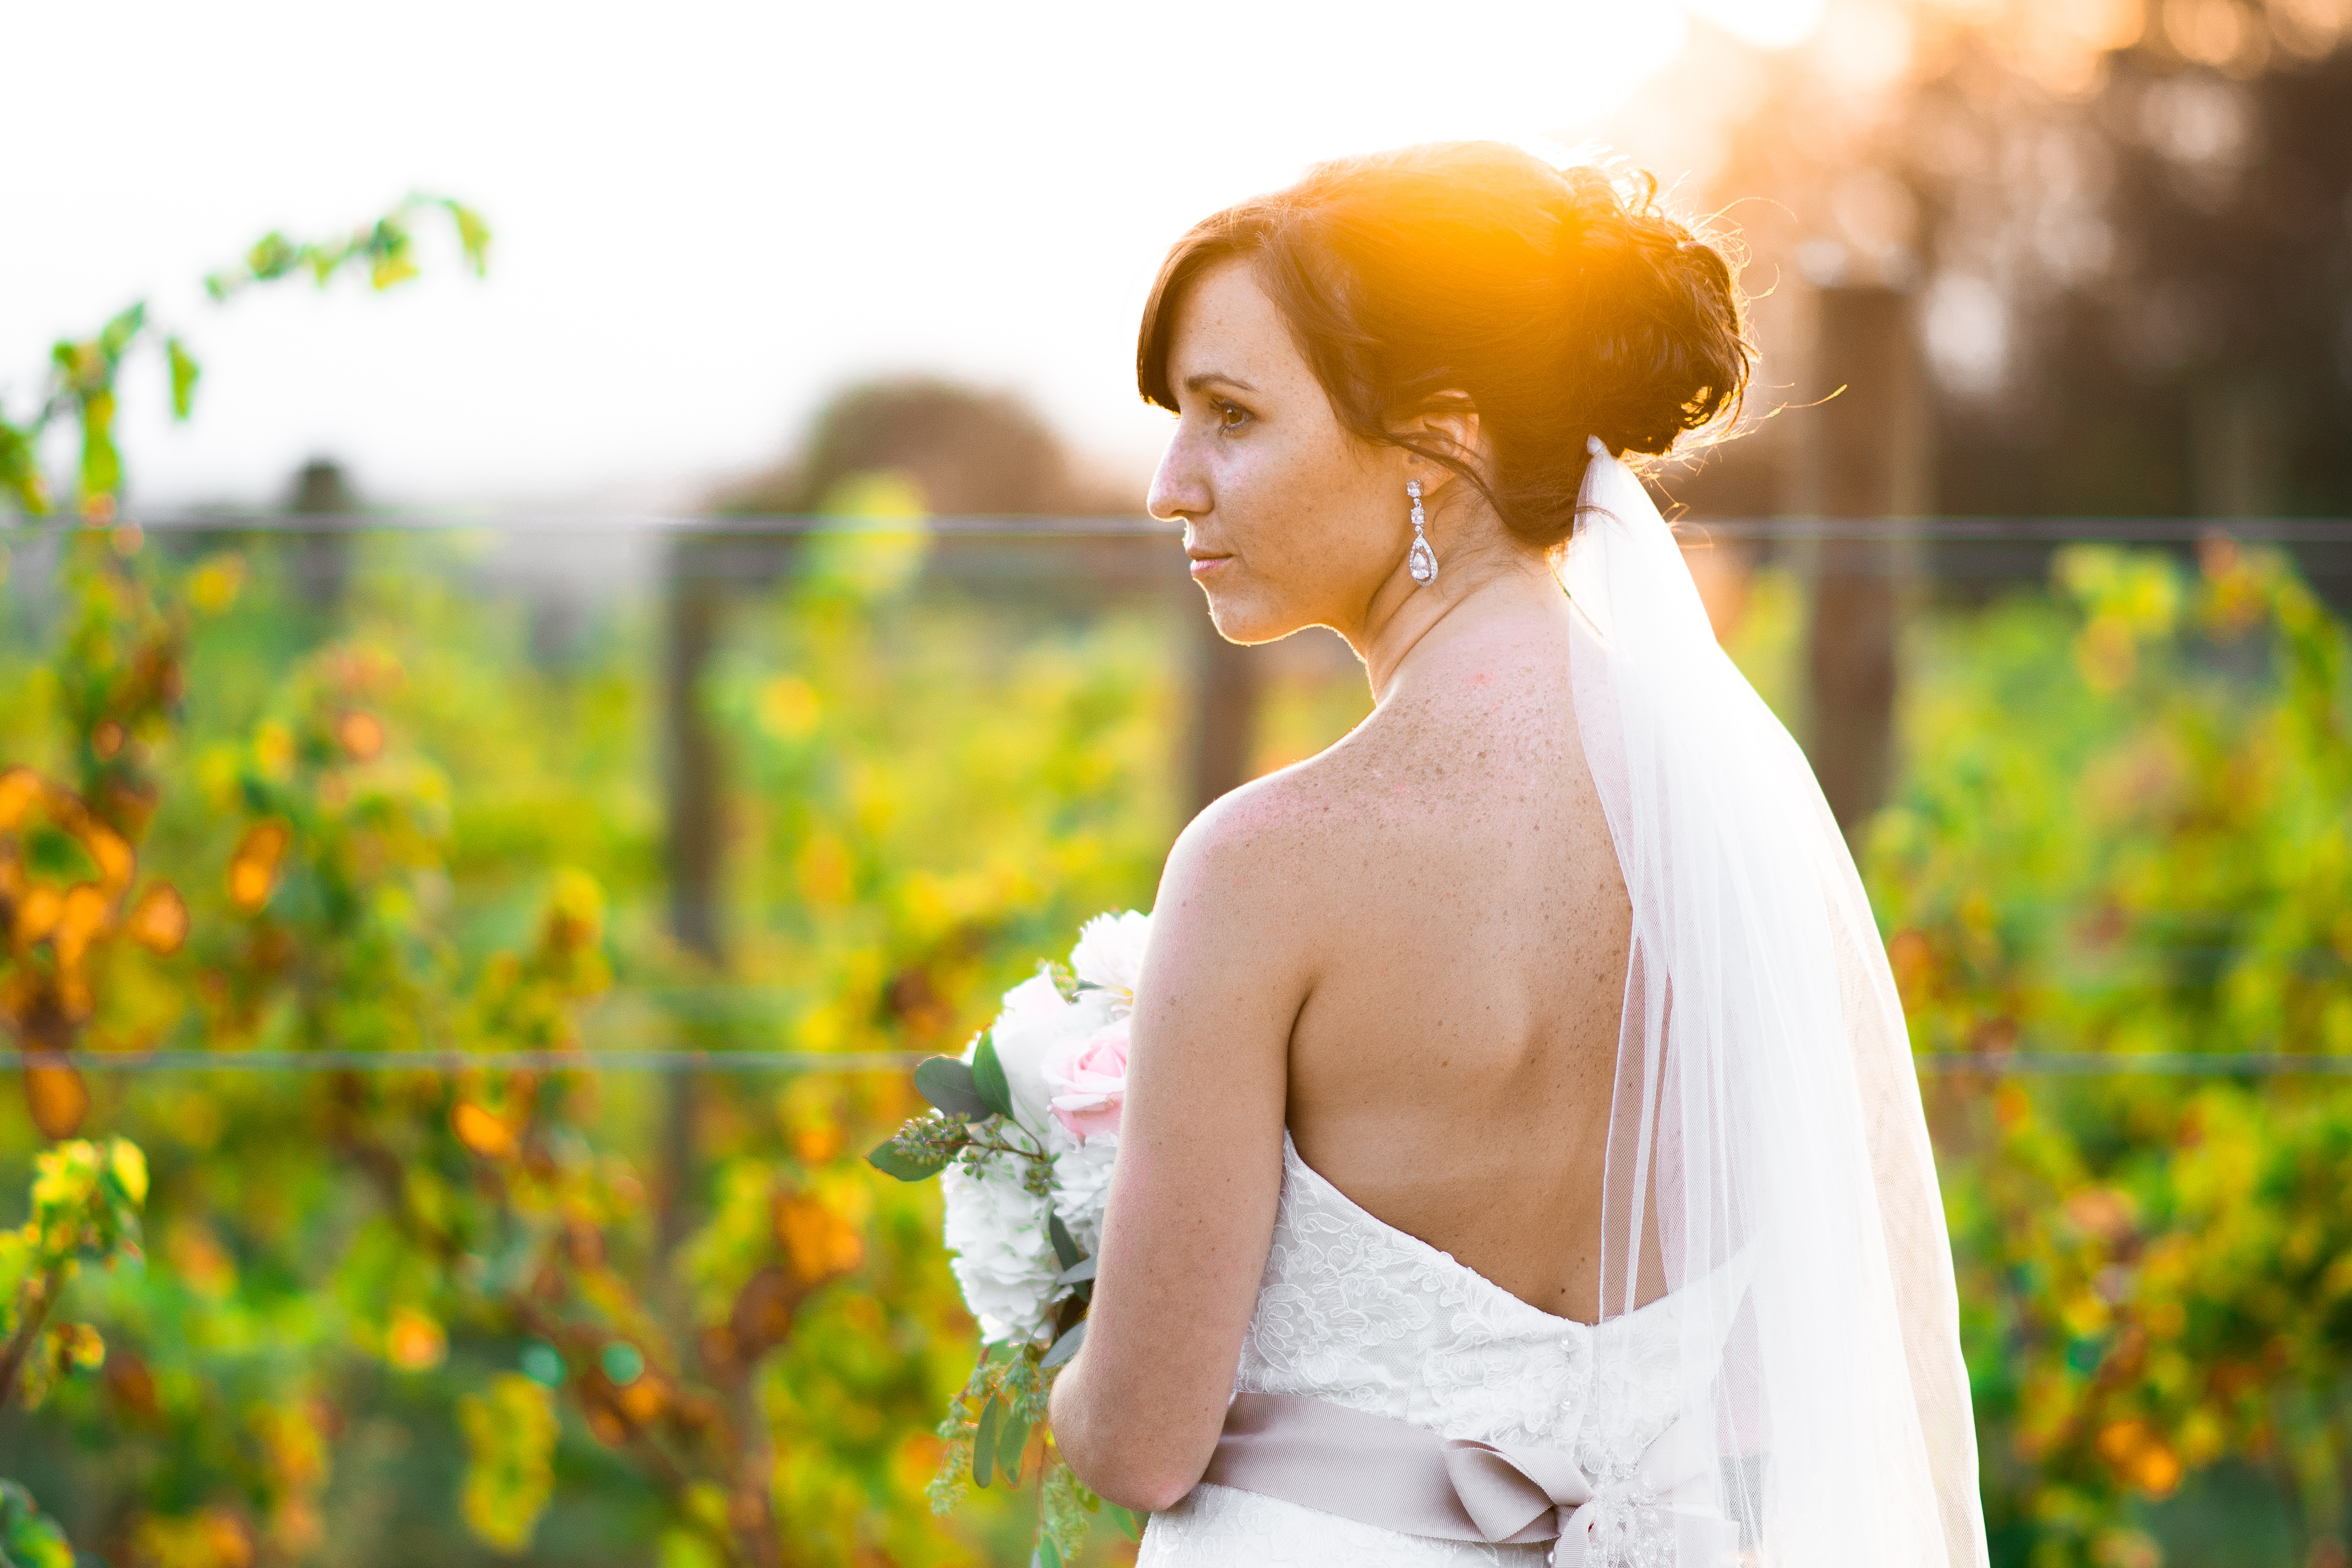 Typically I shoot bridal portraits after a bride has finished dressing, but on Lexi and Glenn's big day we saved them until sunset to get some of her on location at their vineyard wedding.